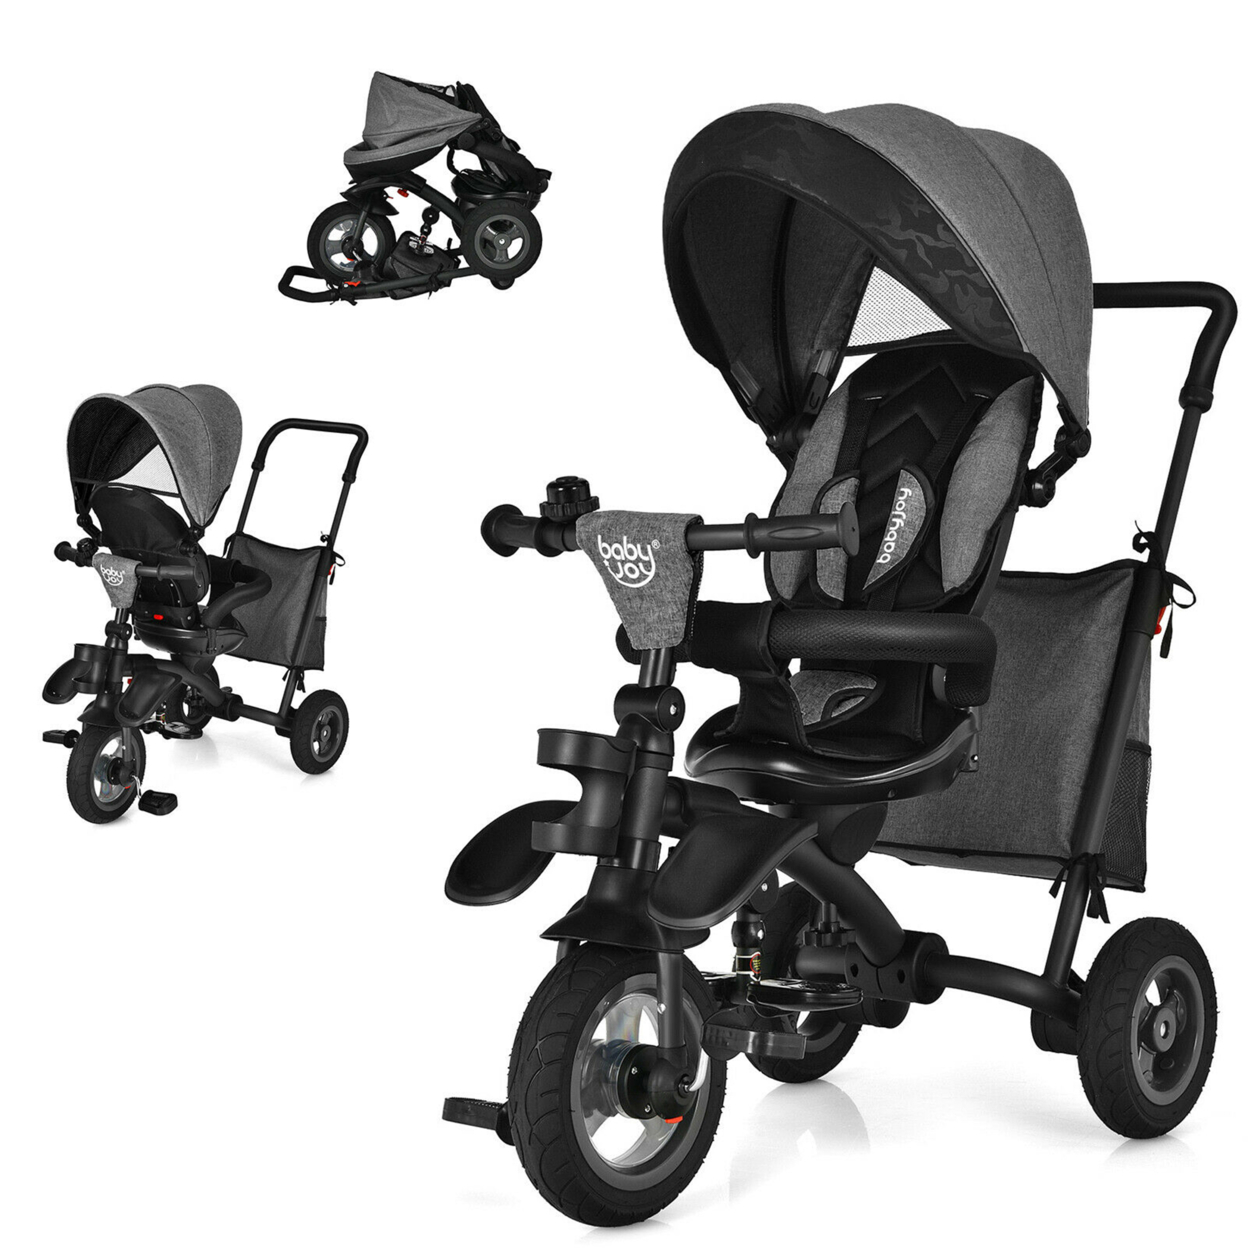 7-In-1 Kids Baby Tricycle Folding Steer Stroller W/ Rotatable Seat - Grey